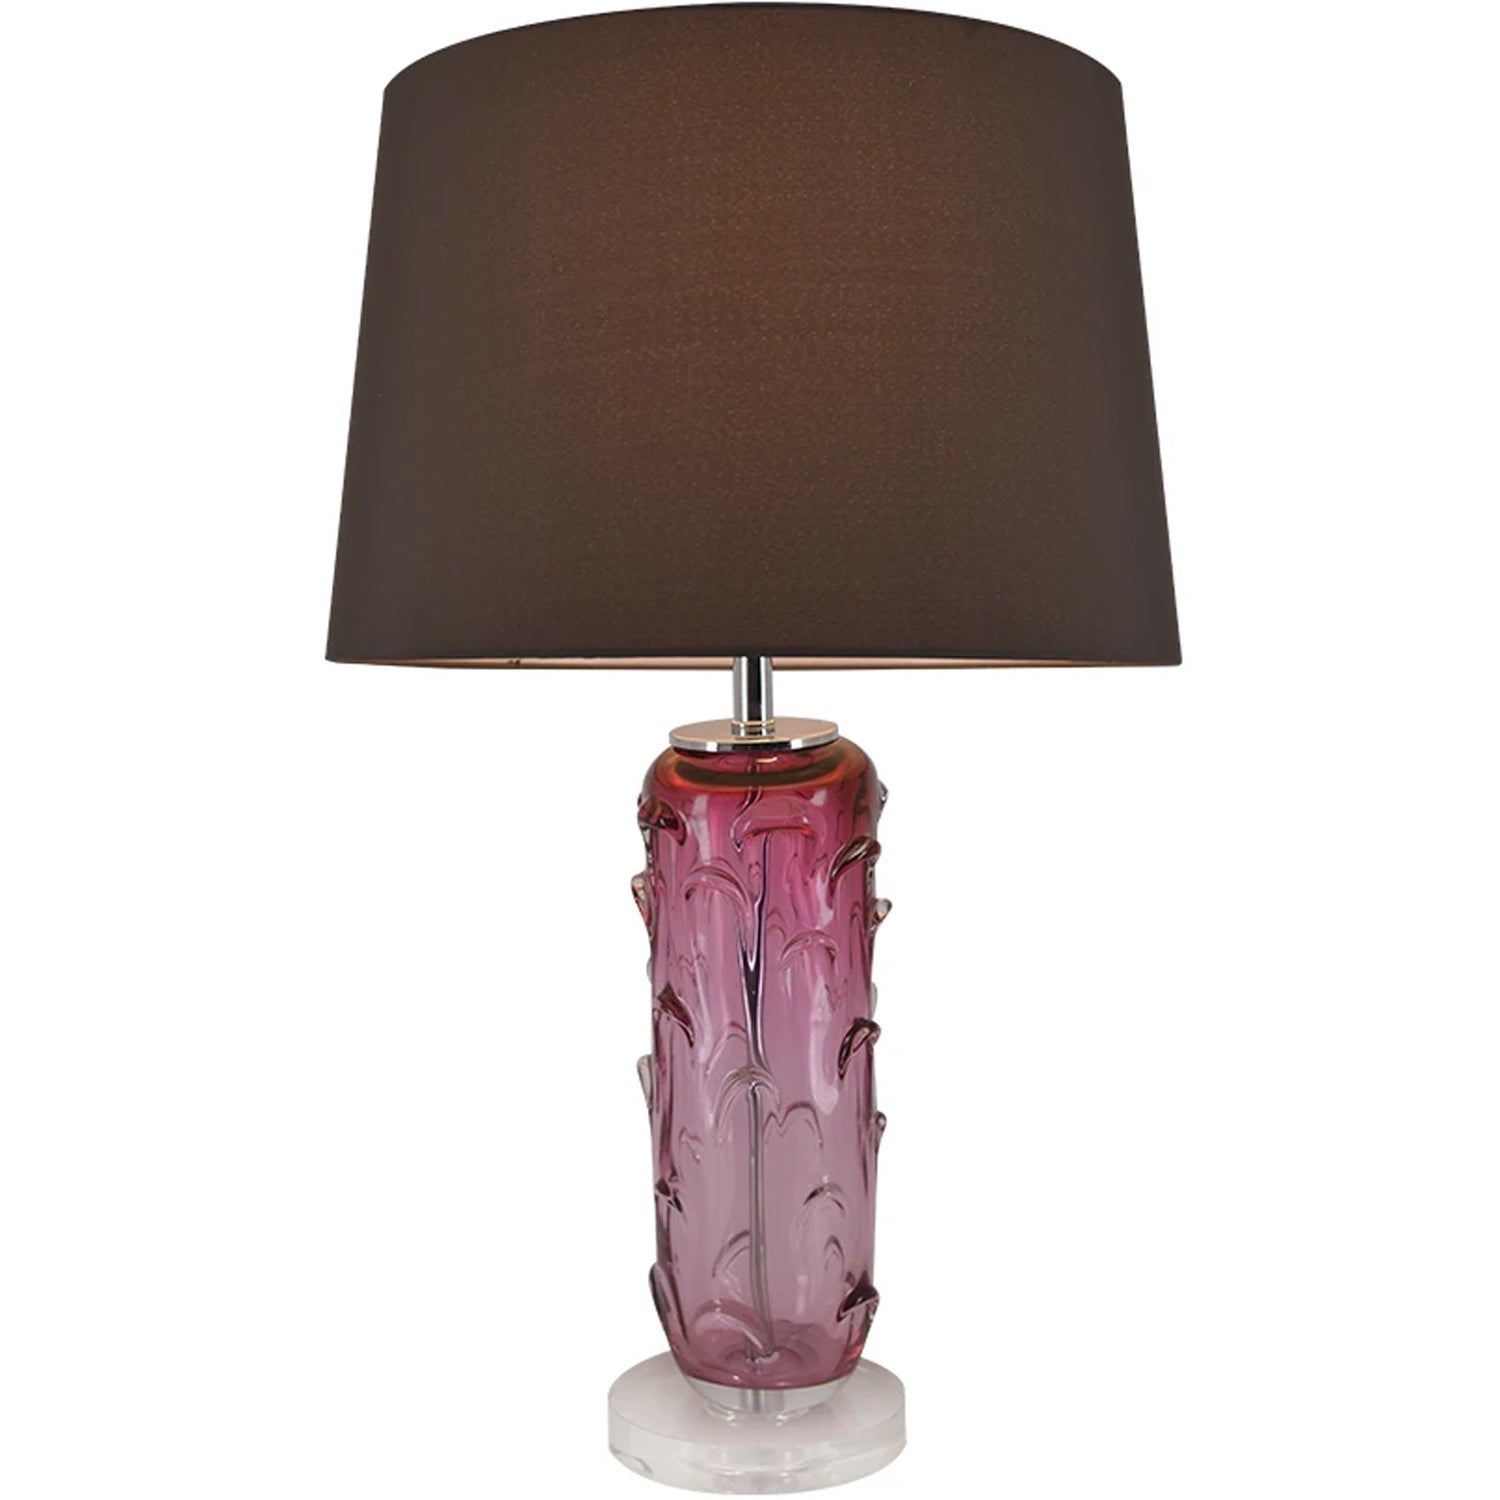 Carro Home Hyacinth Sculpted Translucent Glass Accent Table Lamp 27&quot; - Rouge Pink/Chocolate Brown 